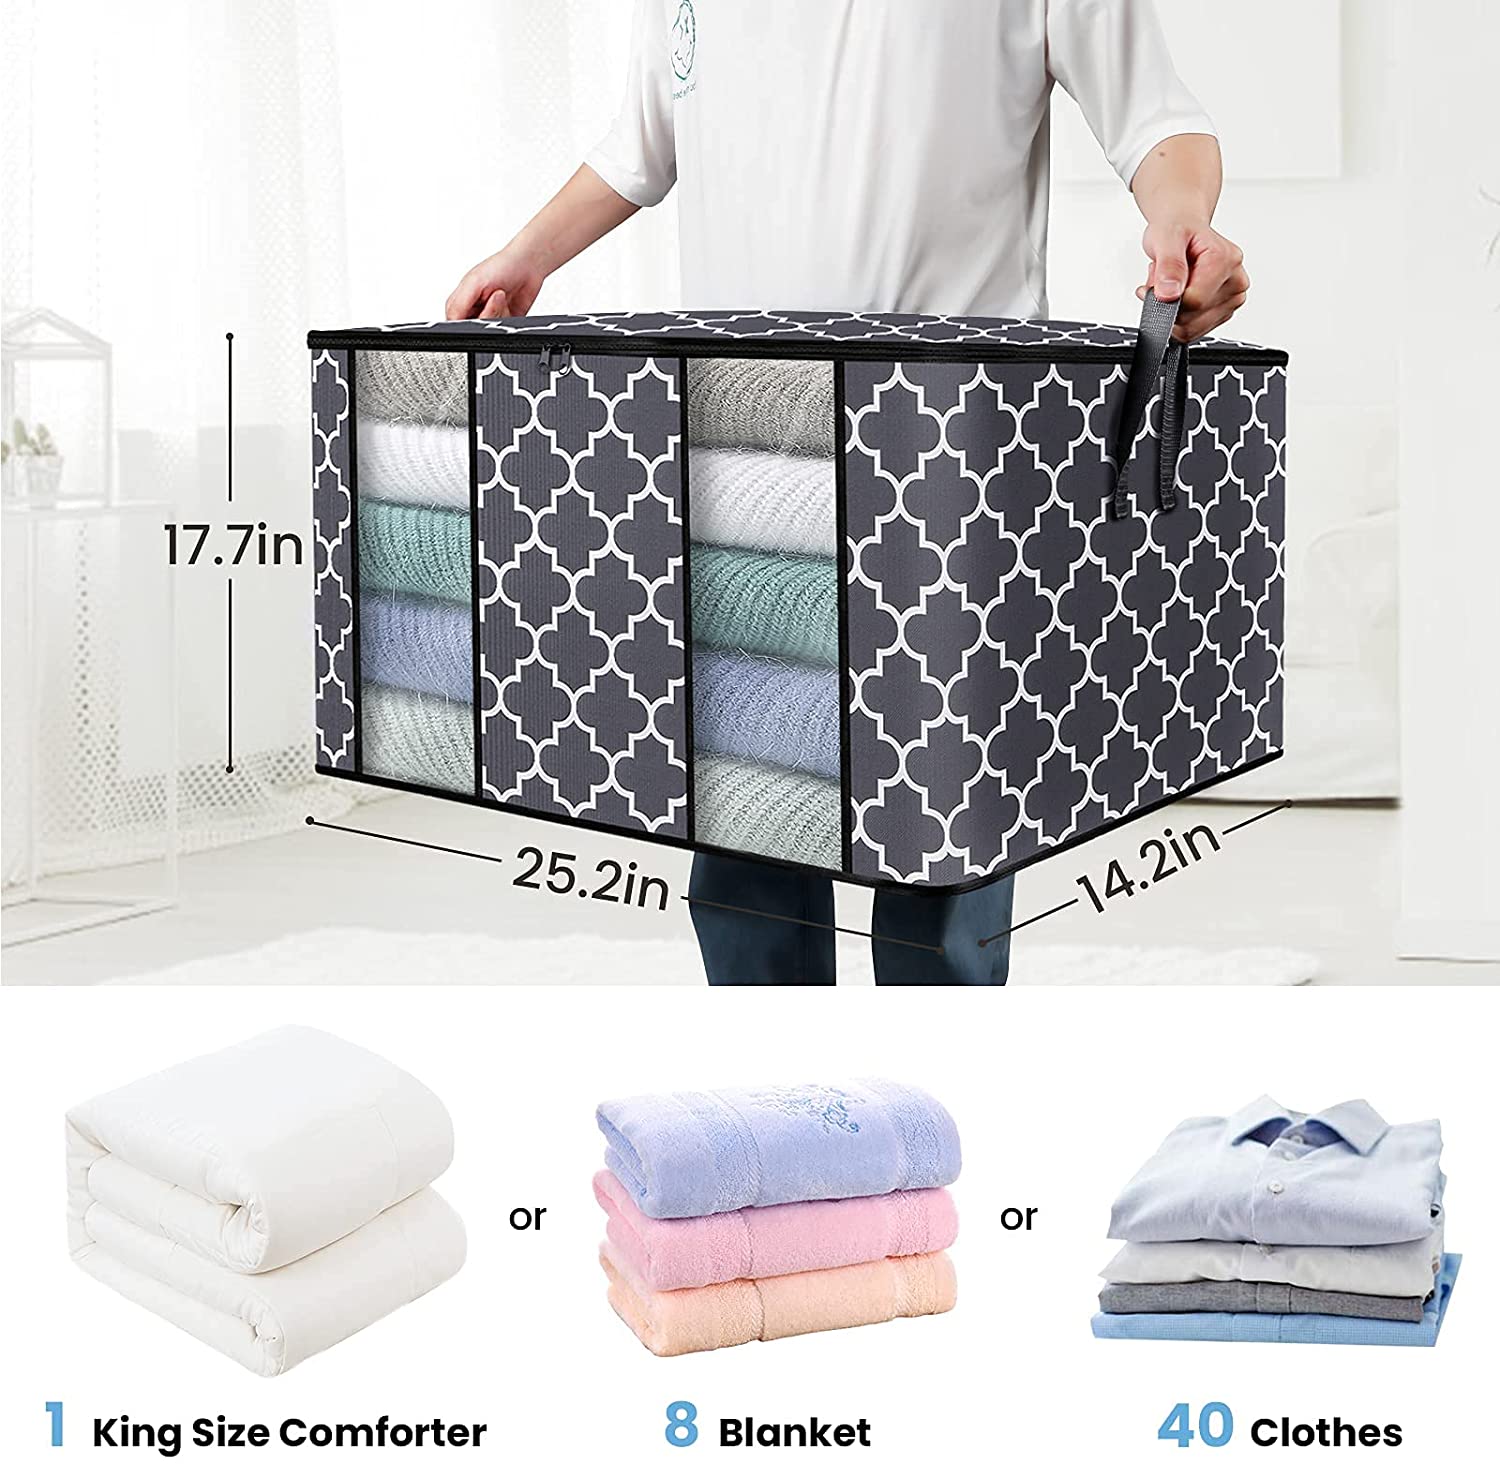 Fabtotes Clothes Storage Bag Organizer [3 Pack/100L], Large Capacity Clothes Organization with Reinforced Handle and Clear Window, Foldable Storage Containers for Comforter, Blanket, Bedding, Grey